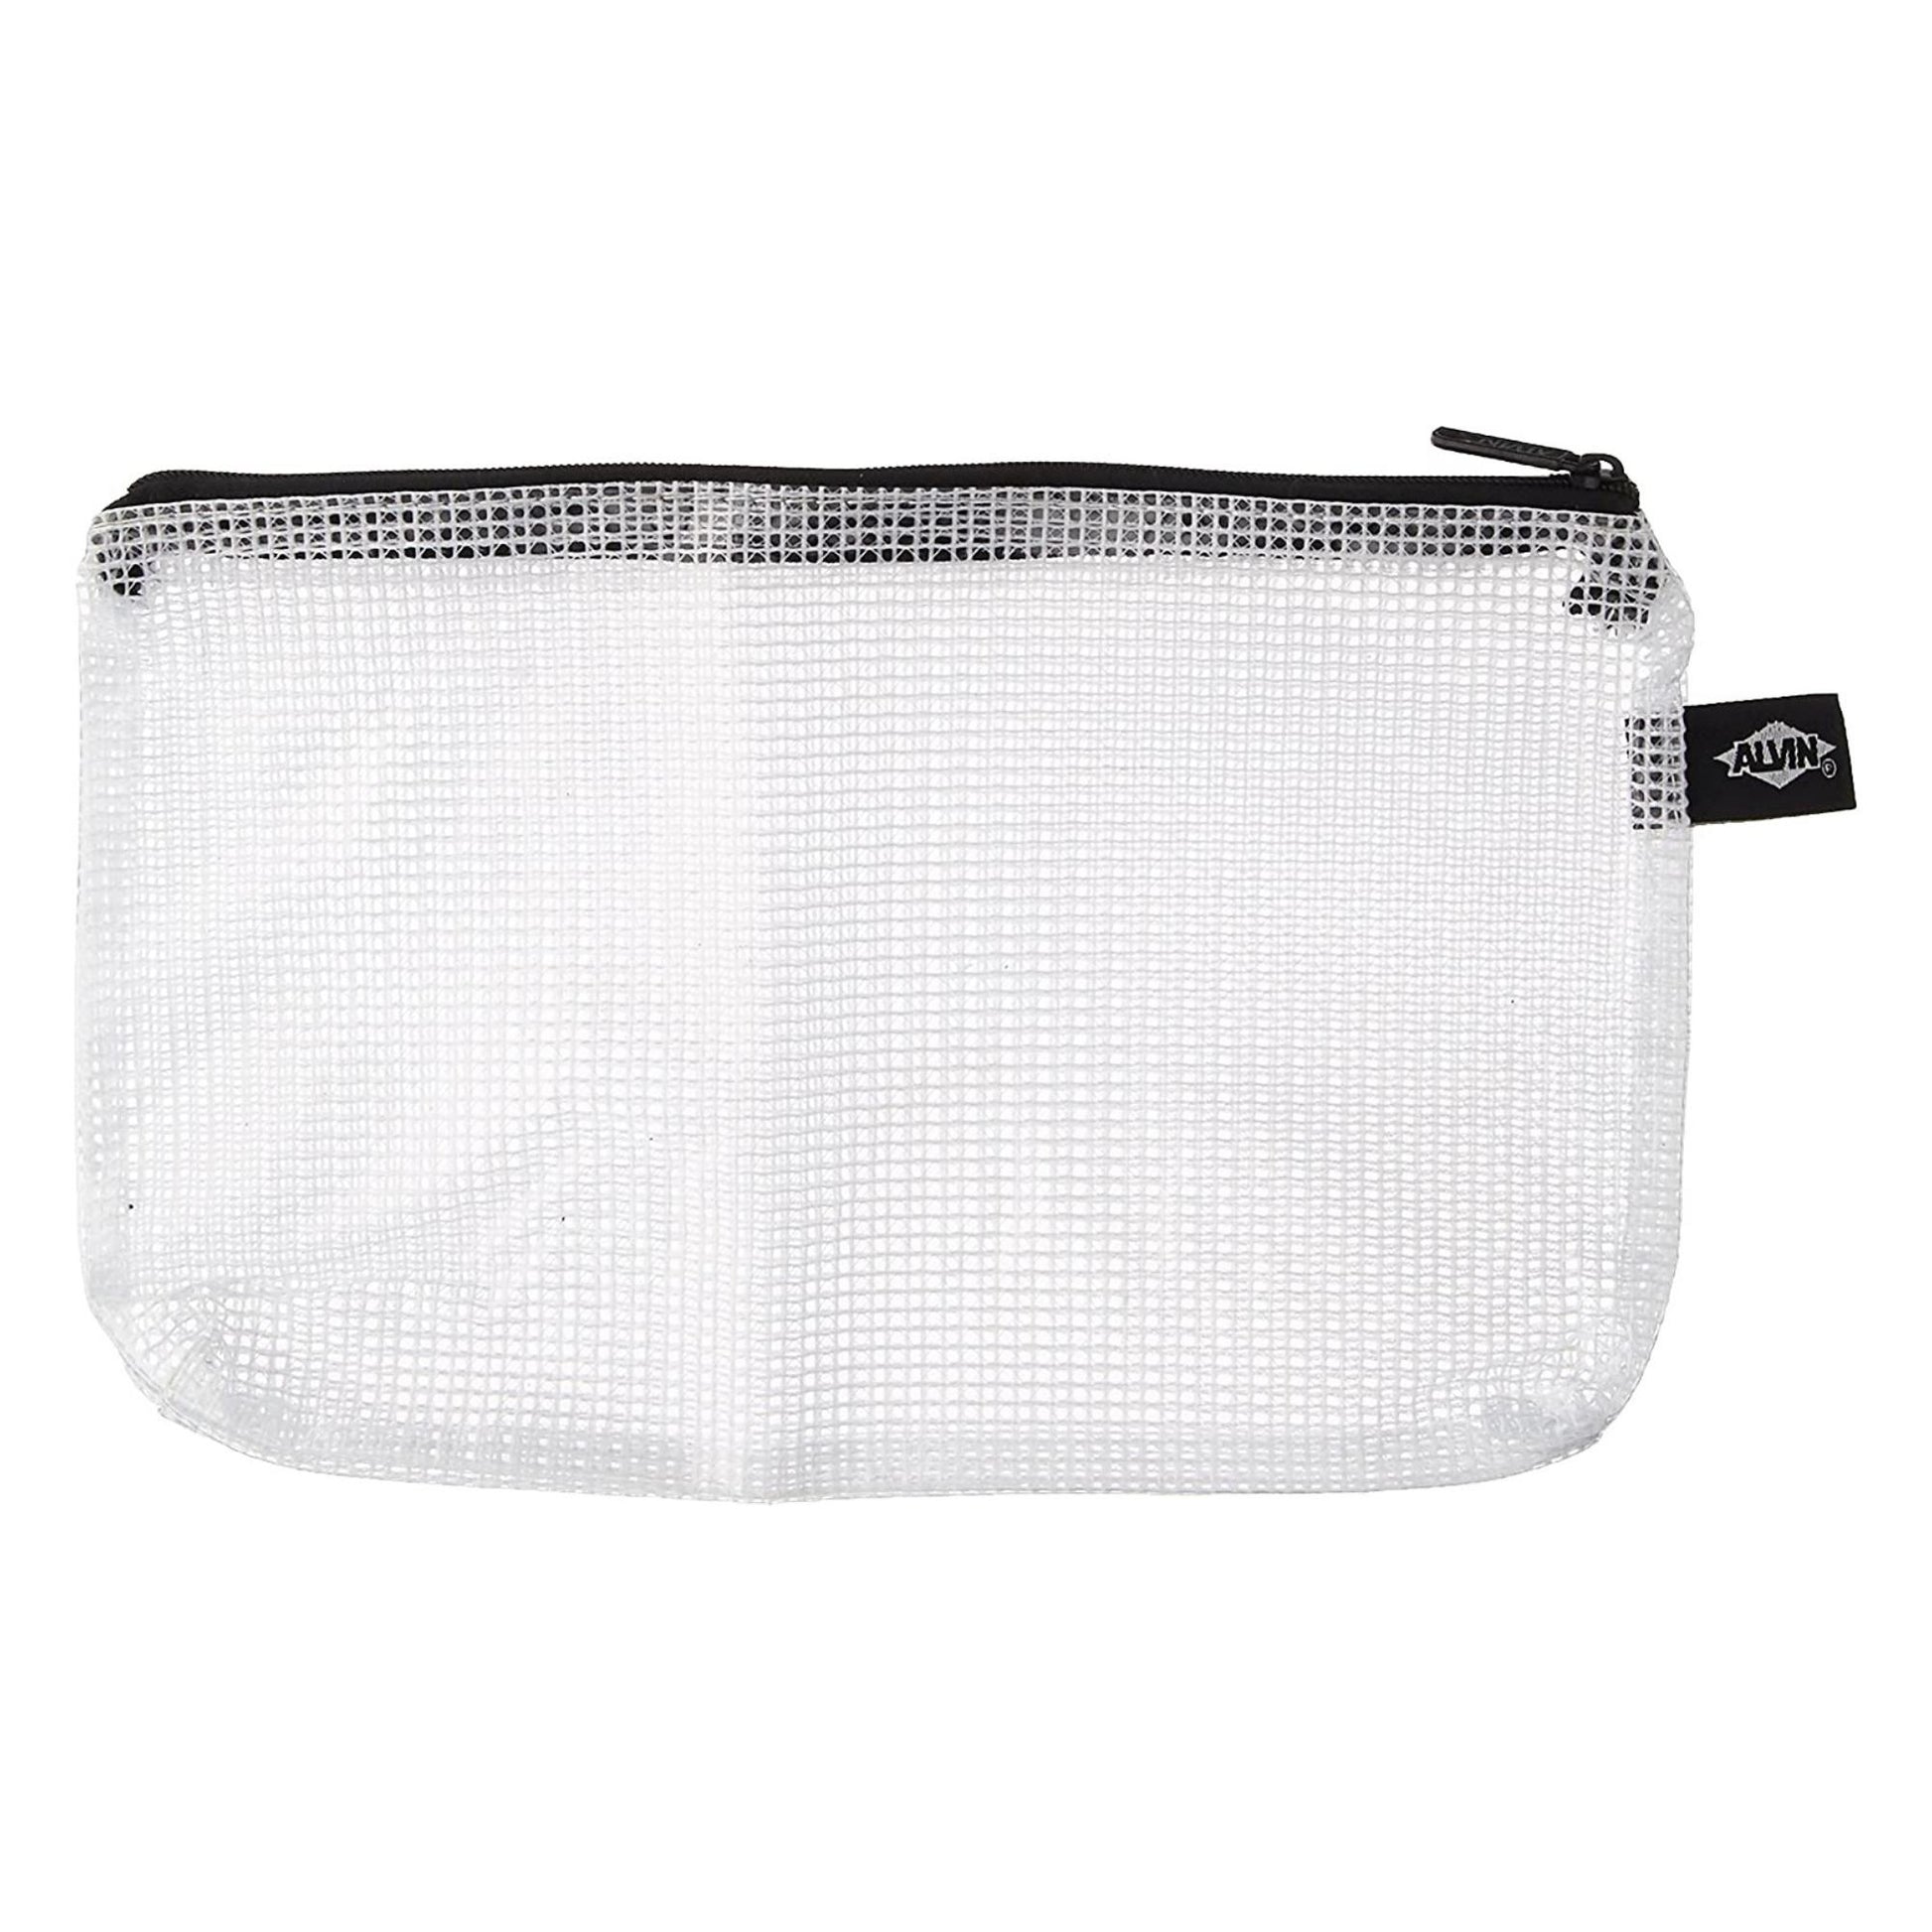  ALVIN - NB1824 Clear PVC Mesh Kit Zipper Bag, Multi-Use  Organization Bag for Item Storage and Arranging, Great for Needlework  Projects, Art Supplies, and Travel - 18 x 24 Inch Bag